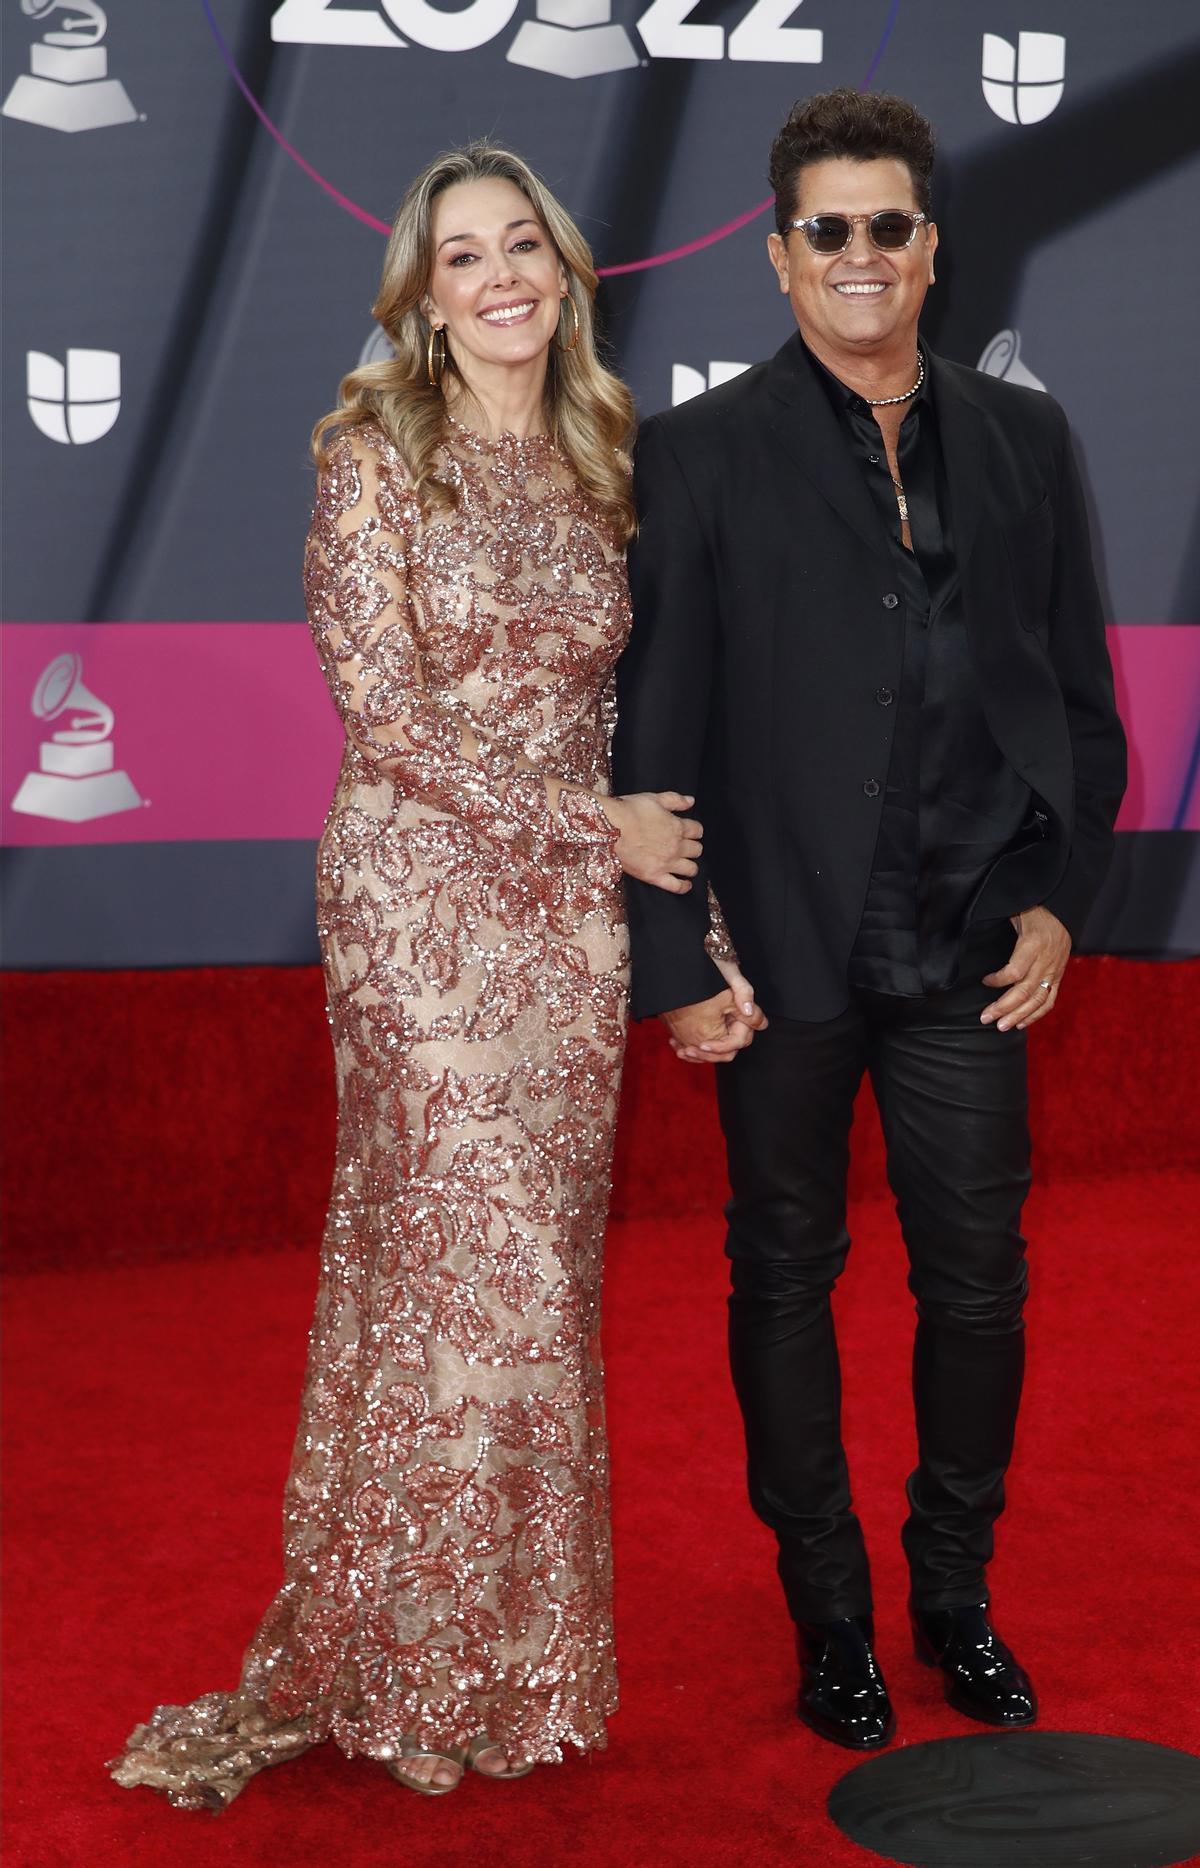 Las Vegas (United States), 17/11/2022.- Carlos Vives (R) arrives on the red carpet prior to the 23rd Annual Latin Grammy Awards at the Michelob Ultra Arena at Mandalay Bay in Las Vegas, Nevada, USA, 17 November 2022. The Latin Grammys recognize artistic and/or technical achievement, not sales figures or chart positions, and the winners are determined by the votes of their peers - the qualified voting members of the Latin Recording Academy. (Estados Unidos) EFE/EPA/CAROLINE BREHMAN